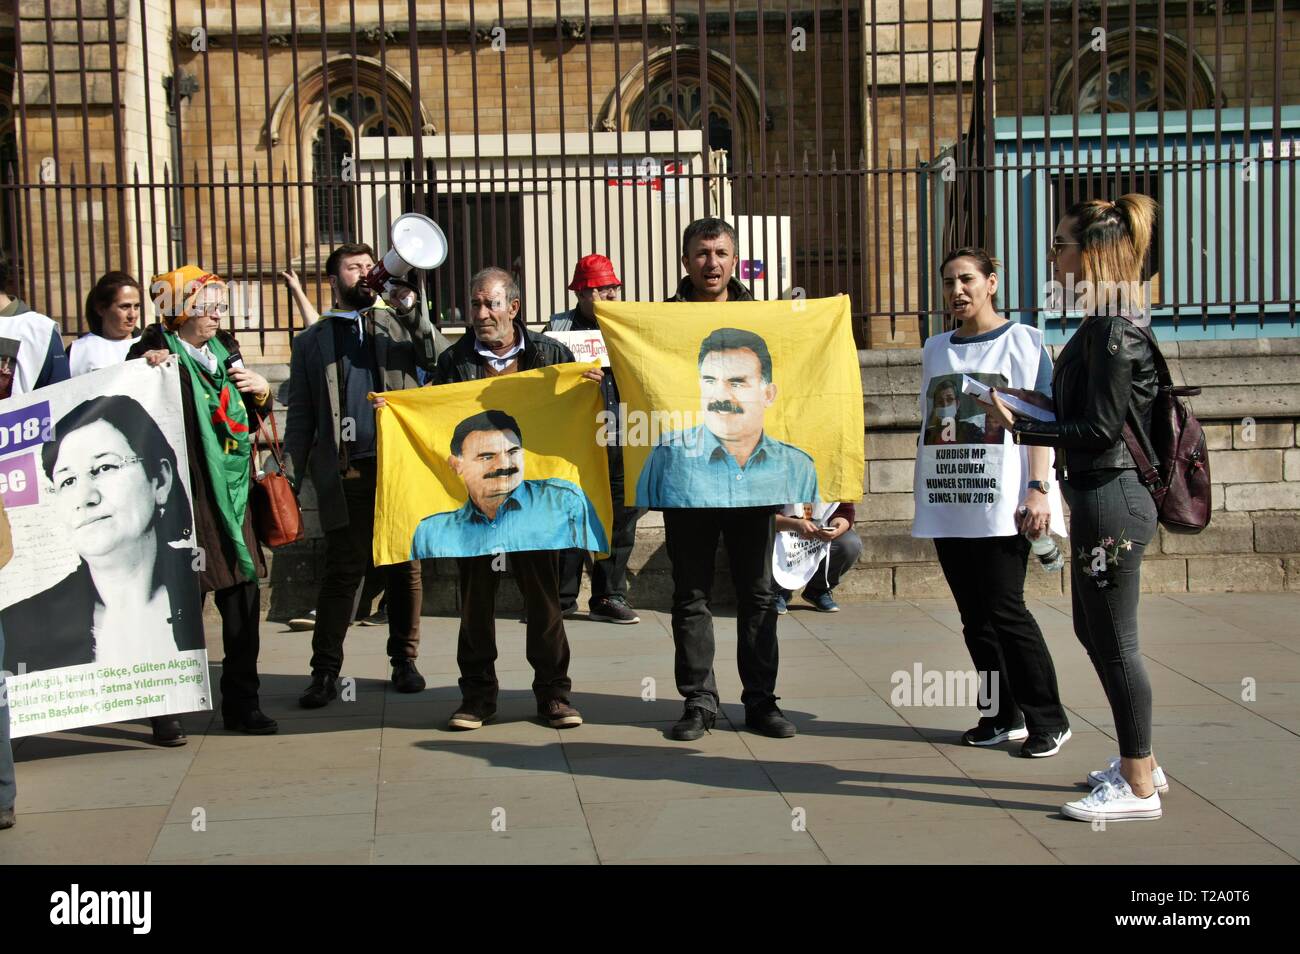 LONDON, UNITED KINGDOM. 29th March 2019, Protesters outside the Houses of Parliament, Westminster to highlight the plight of Turkish Political Prisoner Leyla Guven who is currently on hunger strike in Turkey. © Martin Foskett/Knelstrom Ltd/Alamy Live News Stock Photo